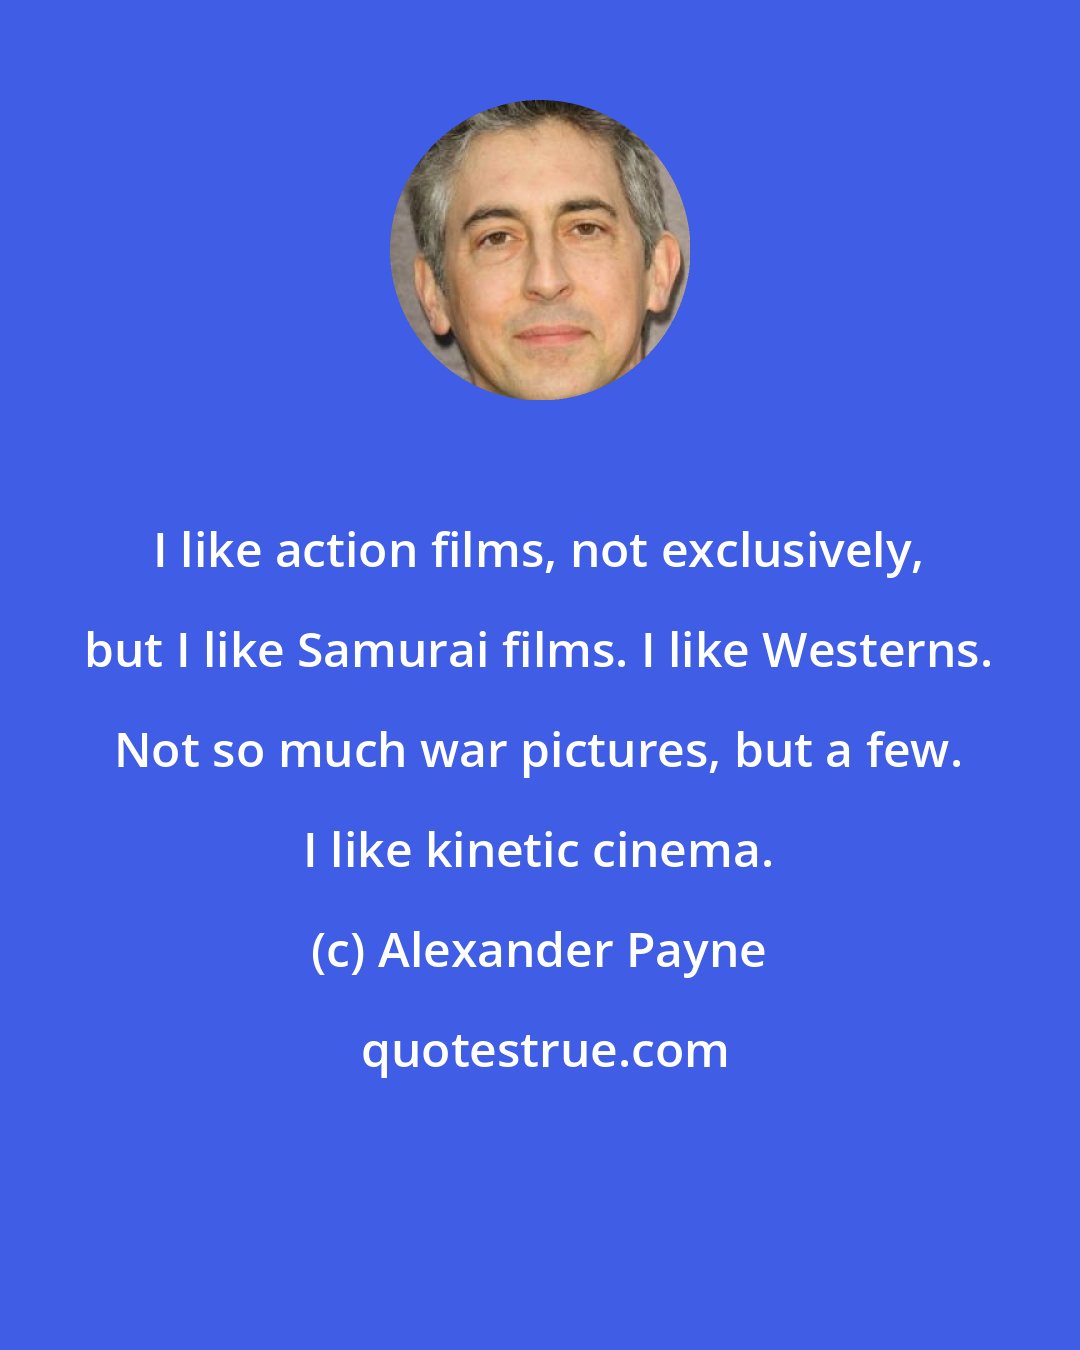 Alexander Payne: I like action films, not exclusively, but I like Samurai films. I like Westerns. Not so much war pictures, but a few. I like kinetic cinema.